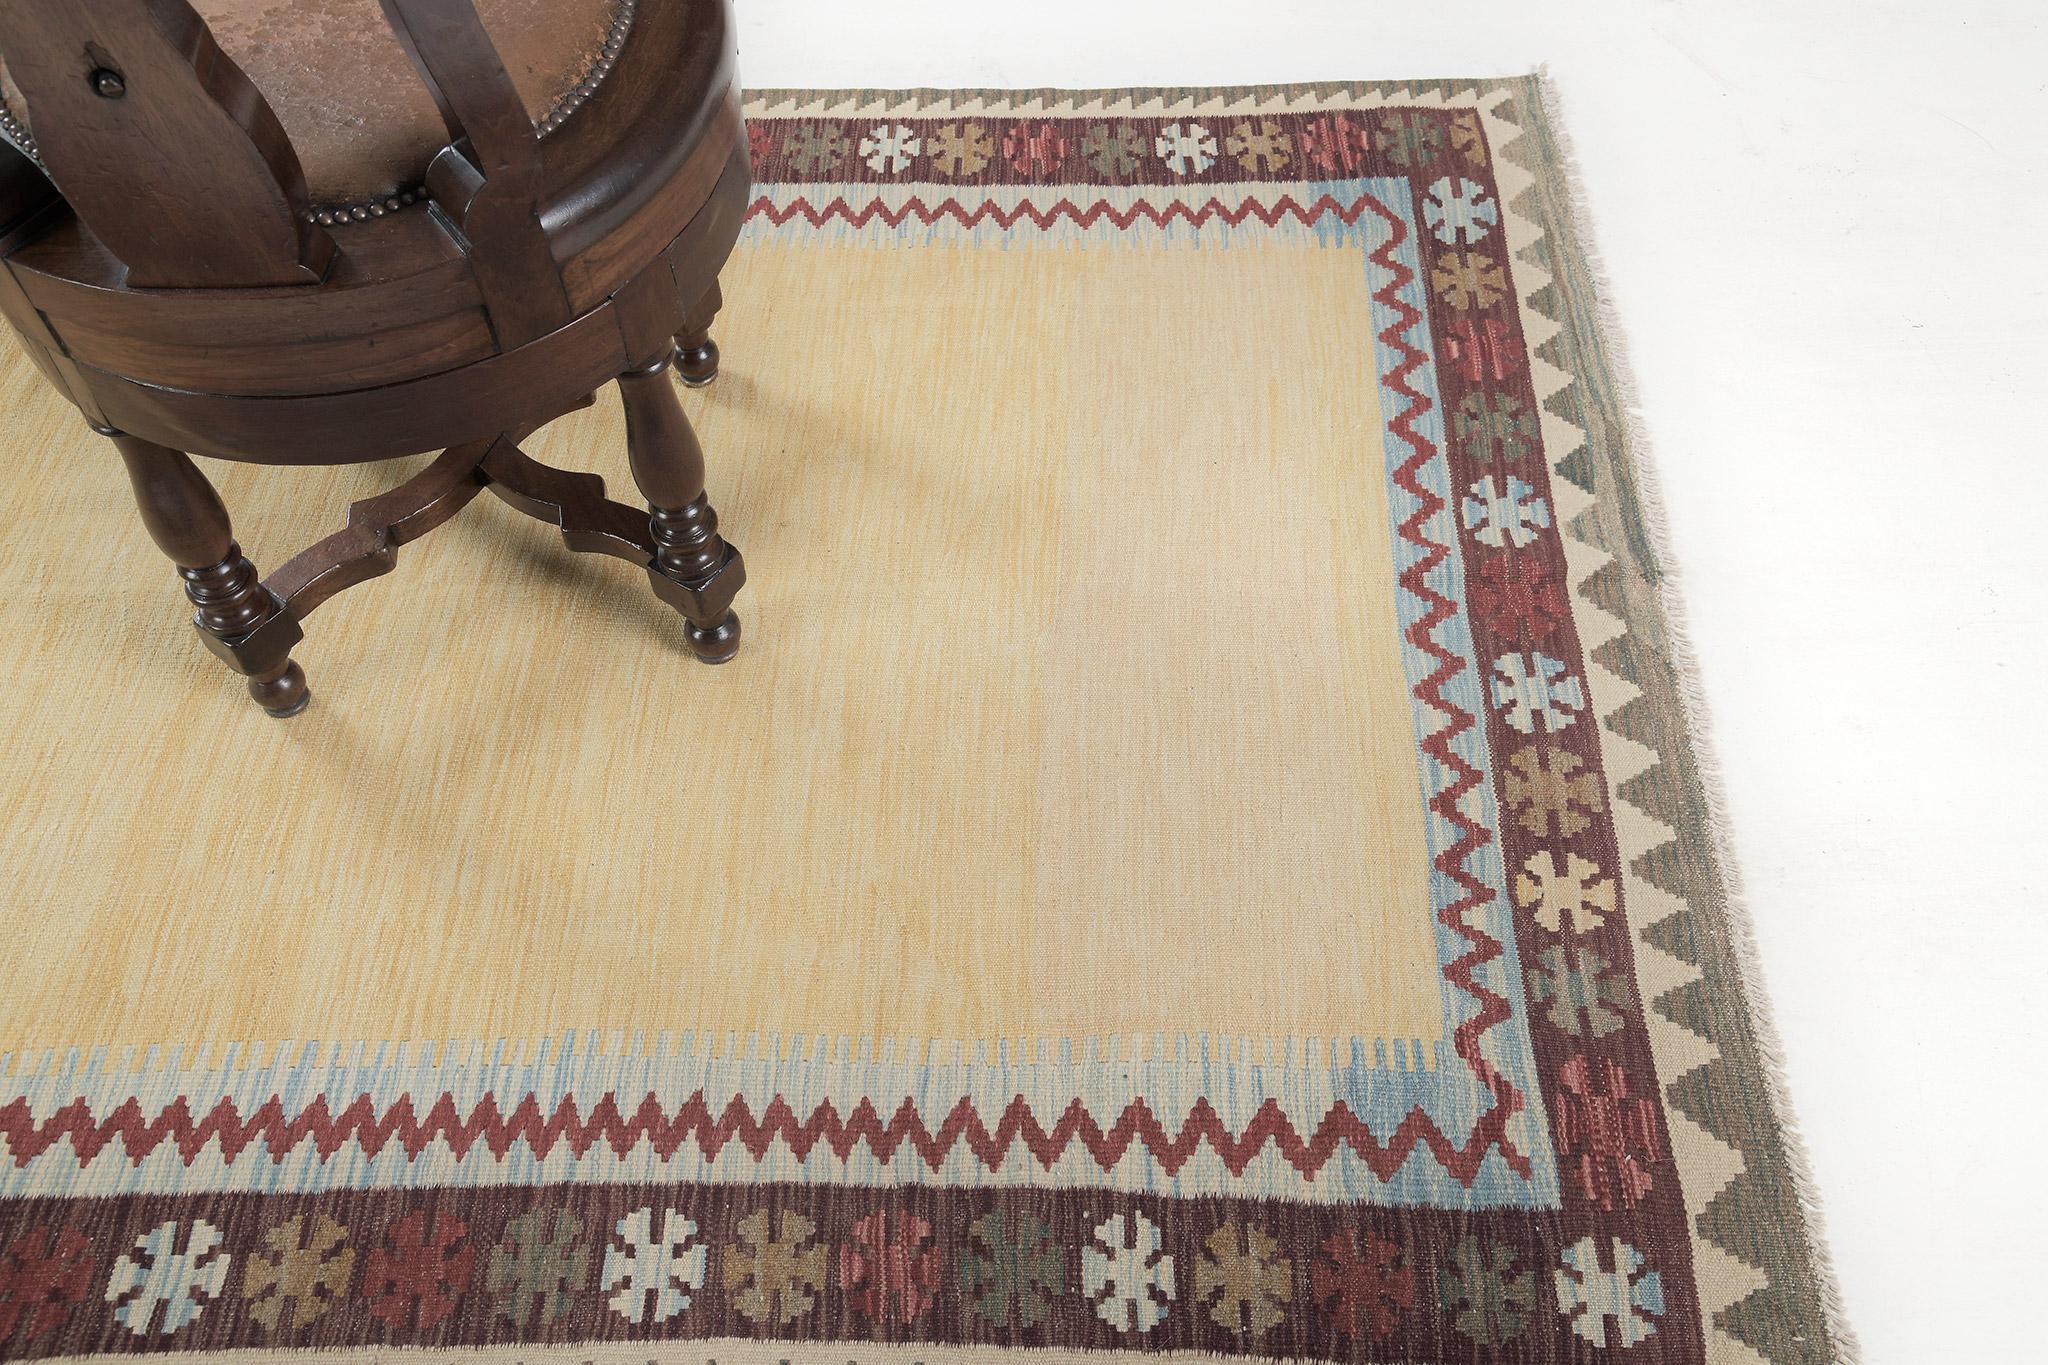 A joyous tribal flatweave features a radiant yellow field surrounded by multicolored motifs and red zigzags. This remarkable tribal rug from our collection is a must-have on your list. The perfect centerpiece that will be adored by many.

Rug